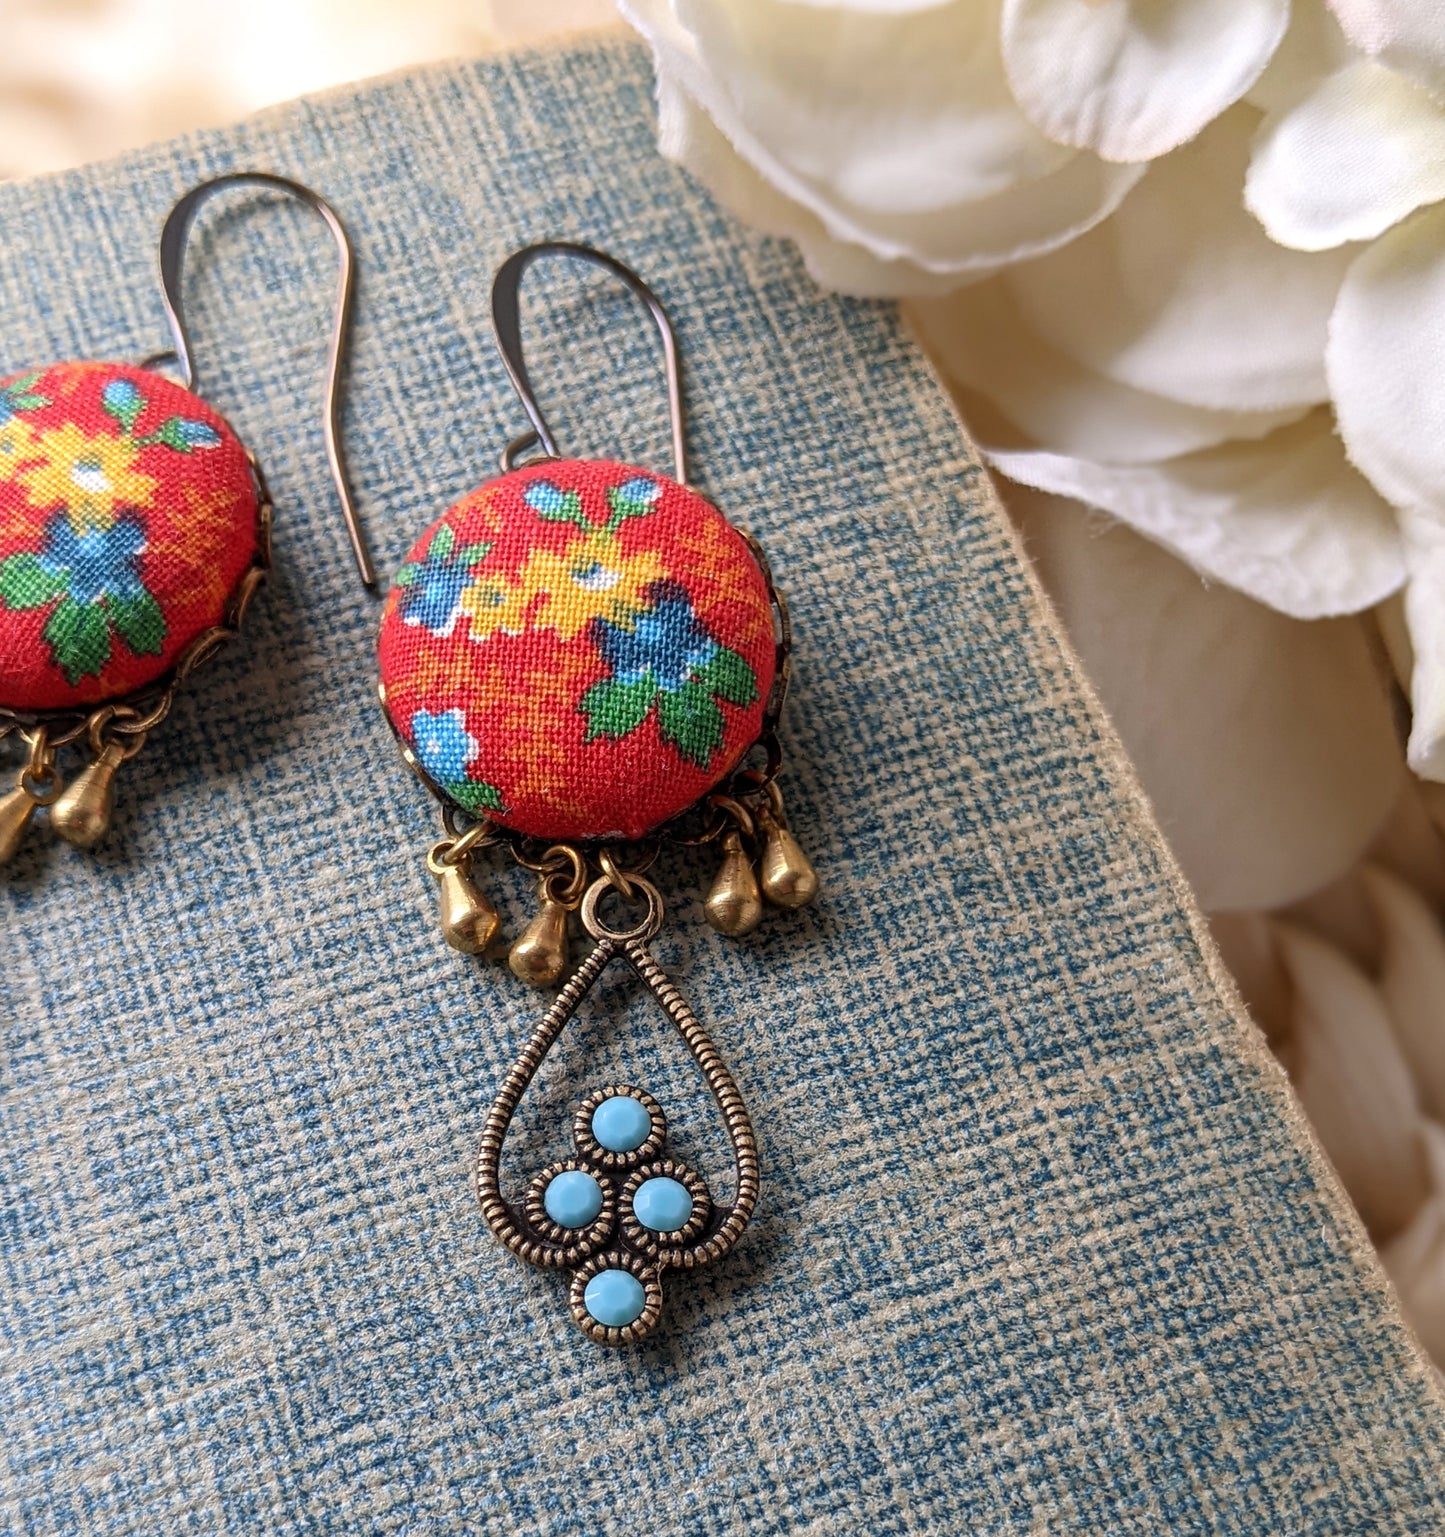 Red And Turquoise Earrings With Vintage Floral Print Fabric And Rhinestones, Boho Southwest Jewelry